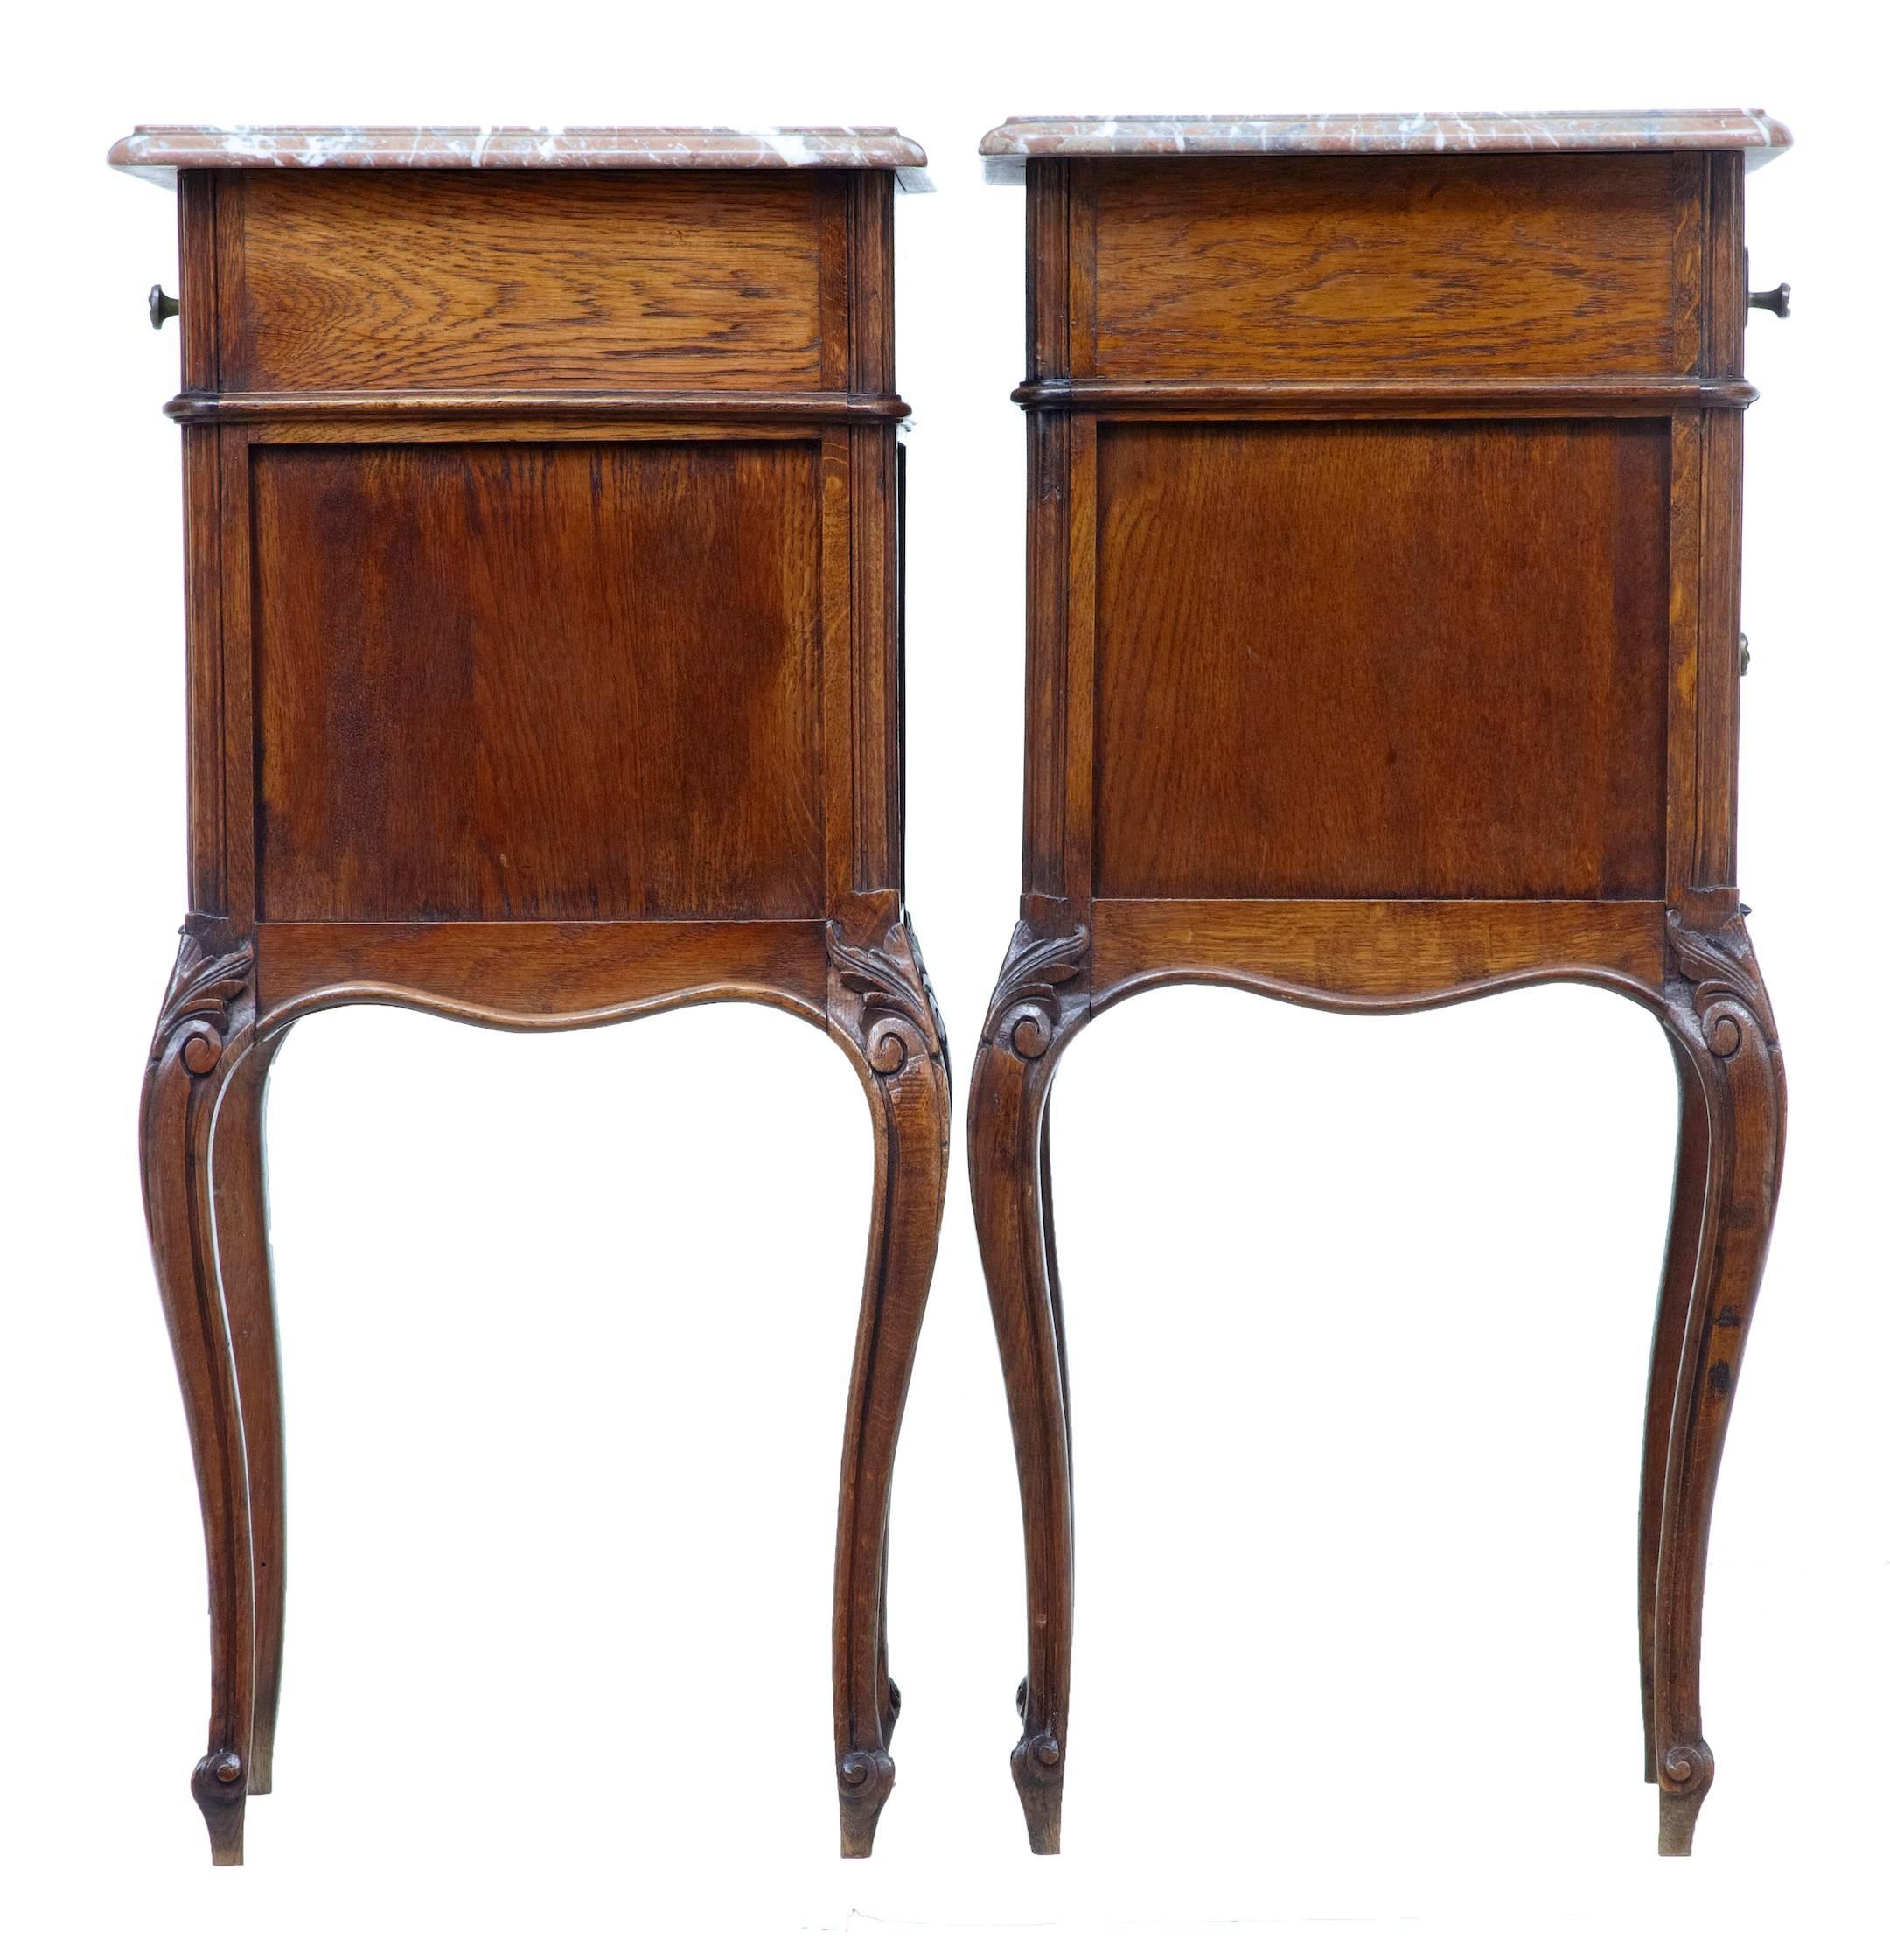 Pair of French 19th century bedside tables, circa 1890.
With pink/grey marble tops which are fixed into place.
Single drawer over single door pot cupboard.
Good color and patina

Measures: Height 34